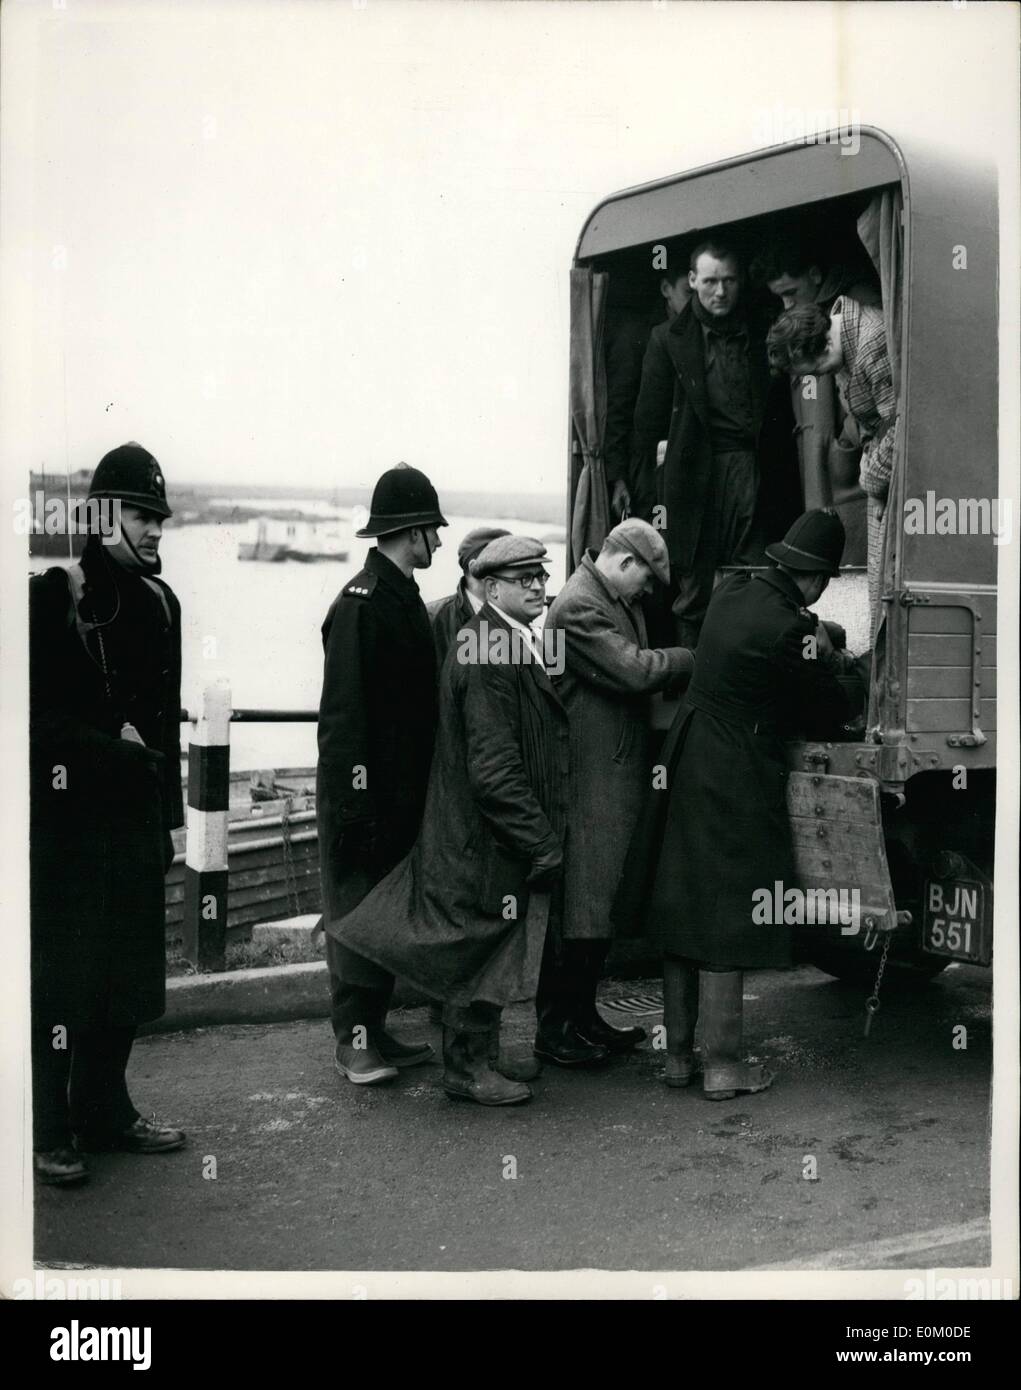 Feb. 02, 1953 - Stopping possible looting at Canvey. Loories cars etc. searched. Photo shows the scene at the entrance to Canvey Island this afternoon as police and officials stop and search a lorry leaving. This is one of the precautions against possible looting. Stock Photo